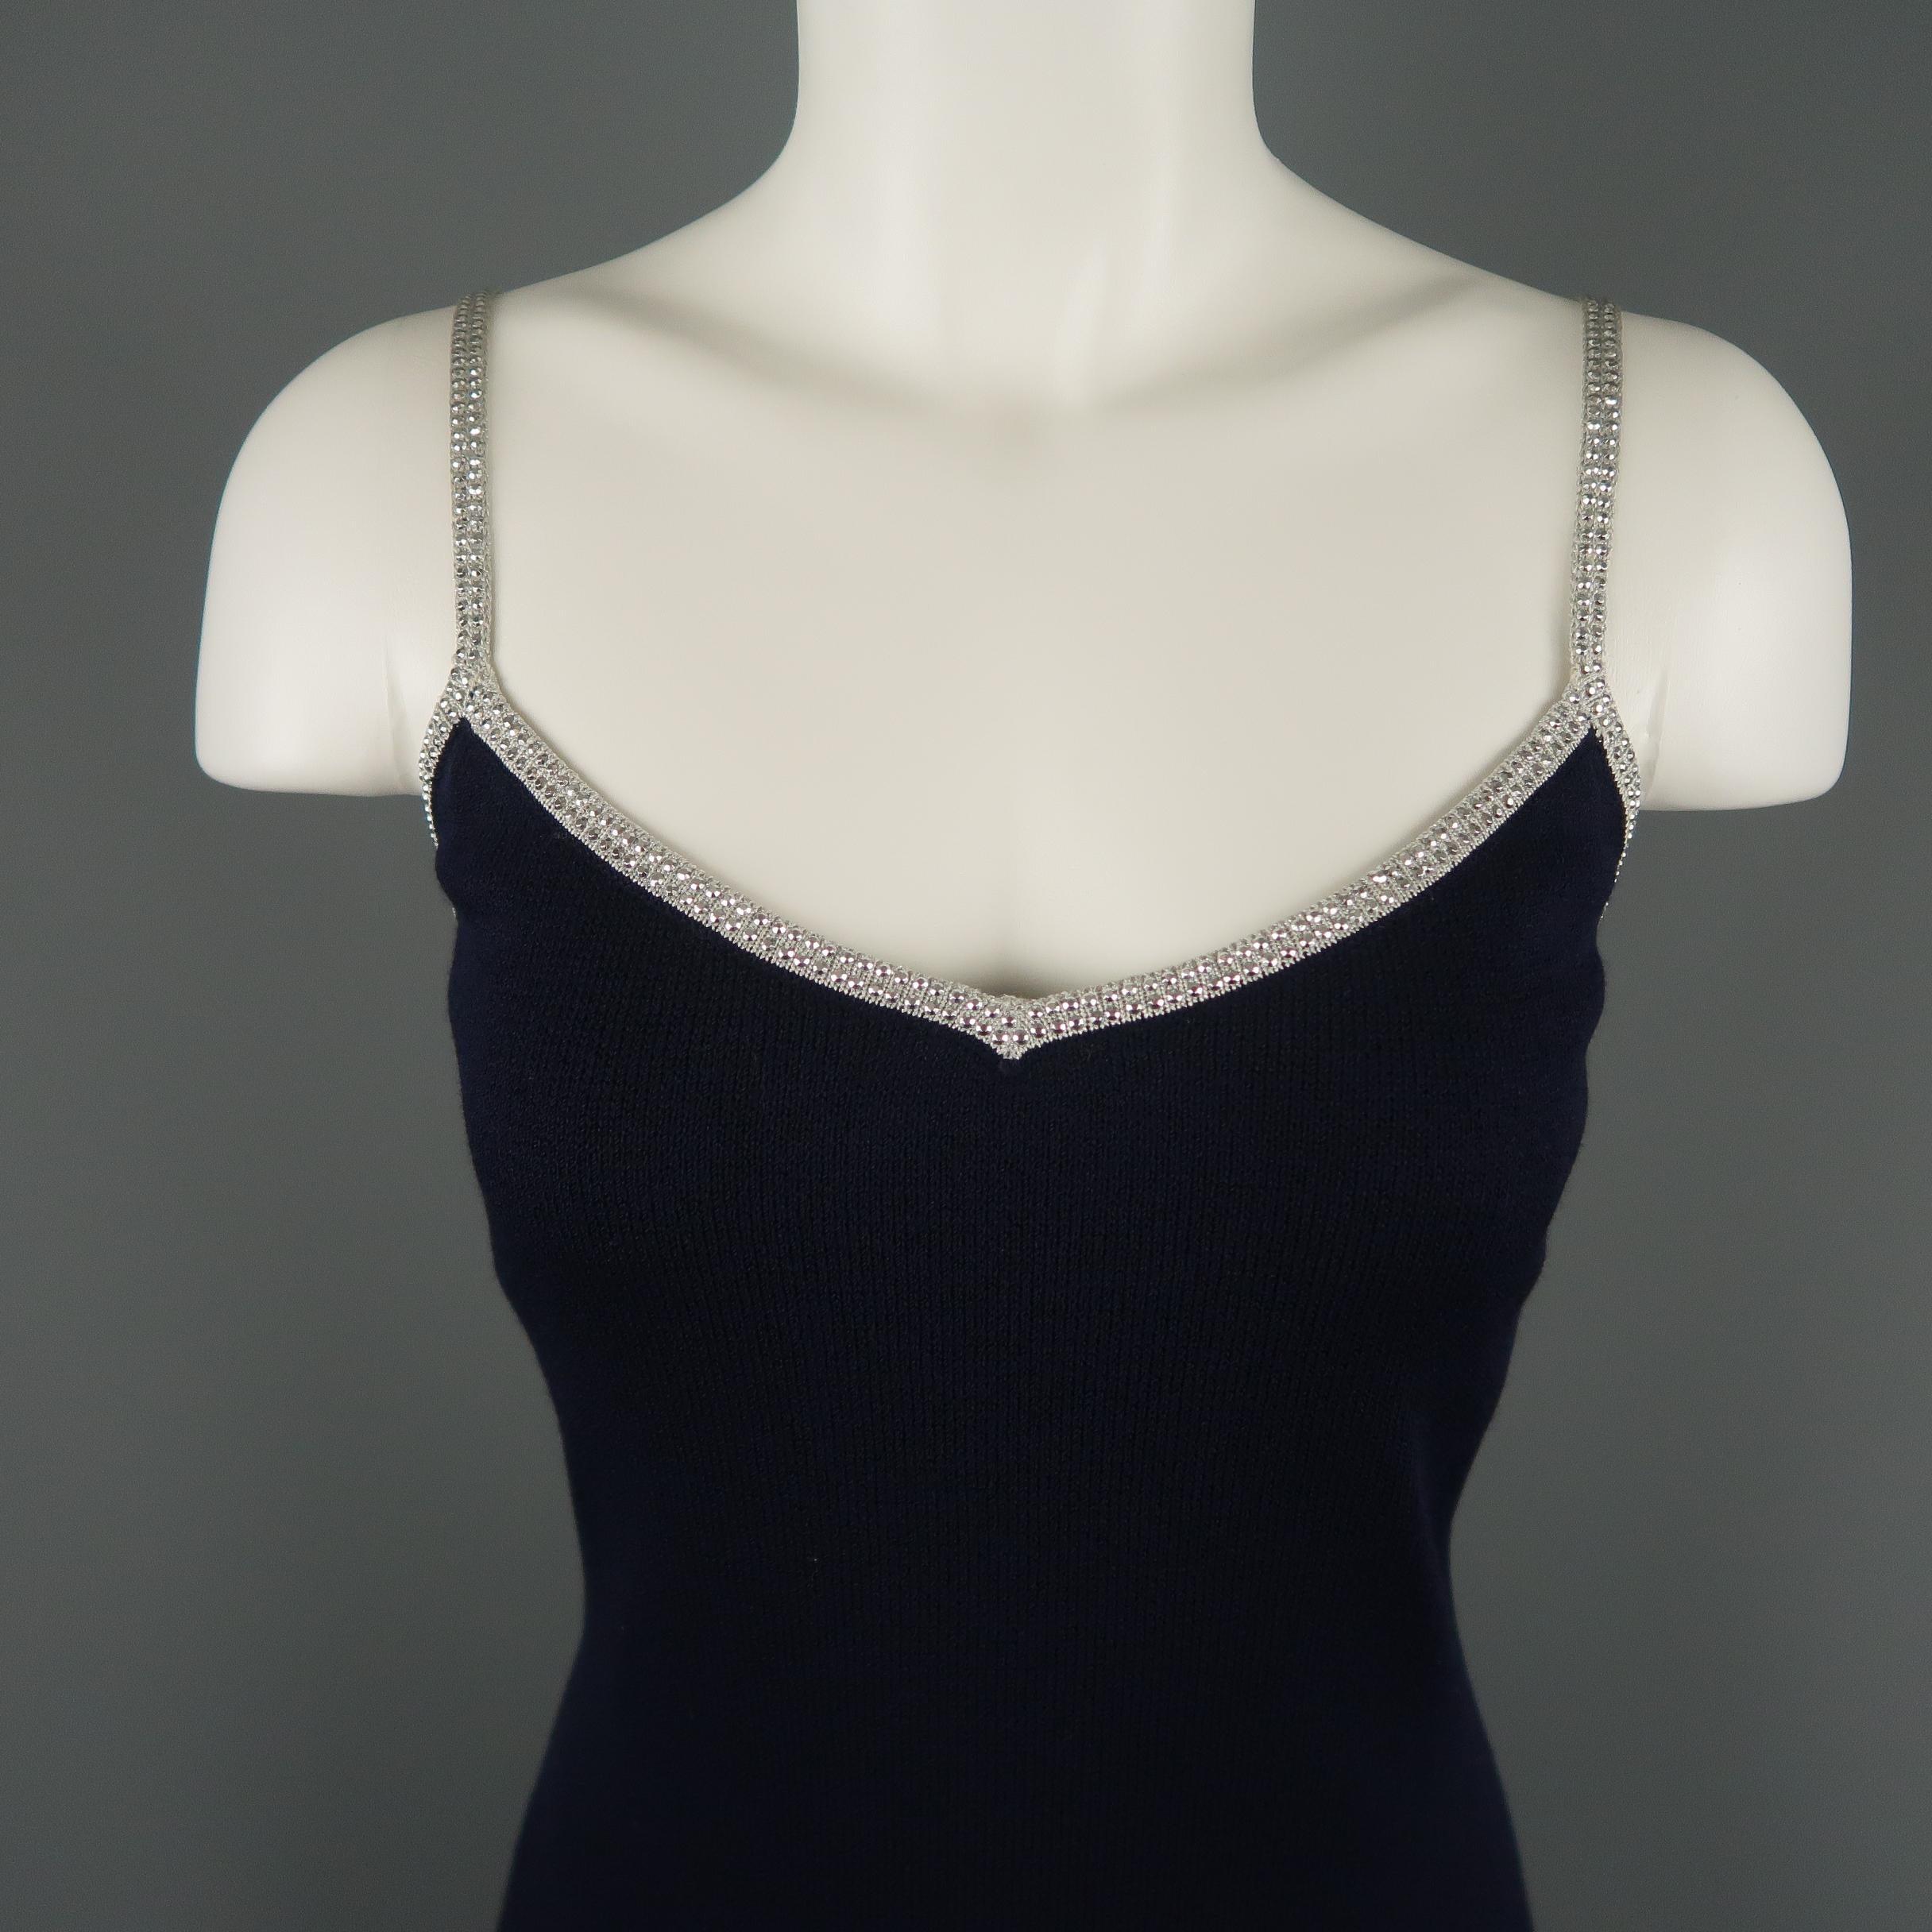 ST. JOHN cocktail dress comes in a navy knit with a sheath slip style silhouette and silver knit trim and spaghetti straps with rhinestones. Made in USA.
 
Excellent Pre-Owned Condition.
Marked: 8
 
Measurements:
 
Shoulder: 12 in.
Bust: 36